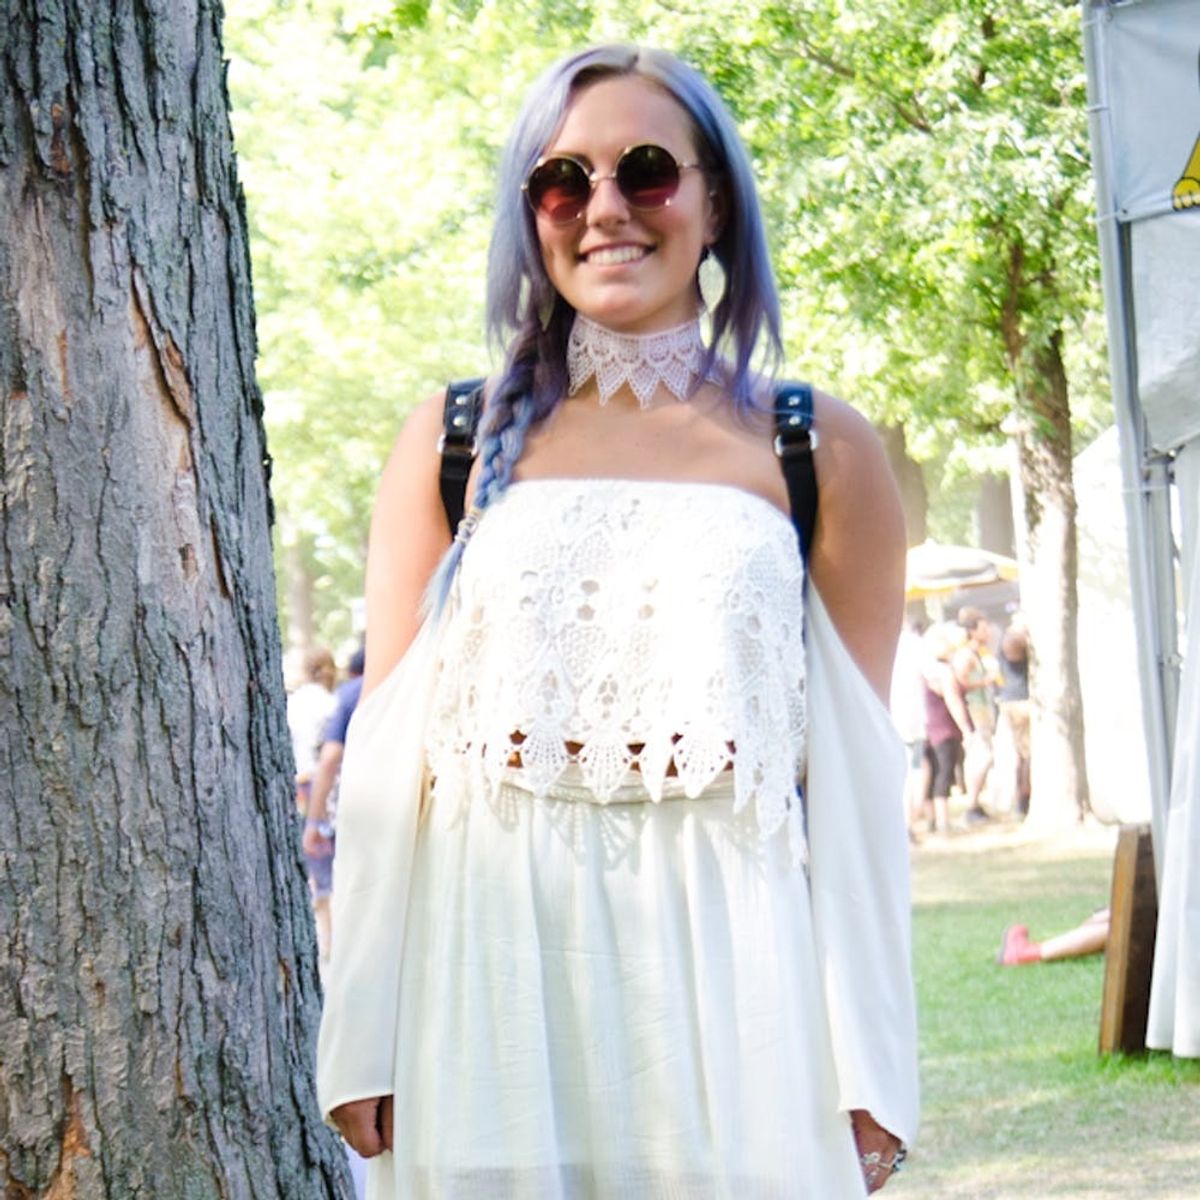 All Our Fave Street Style Looks from Osheaga, the Lollapalooza Rival in Montreal